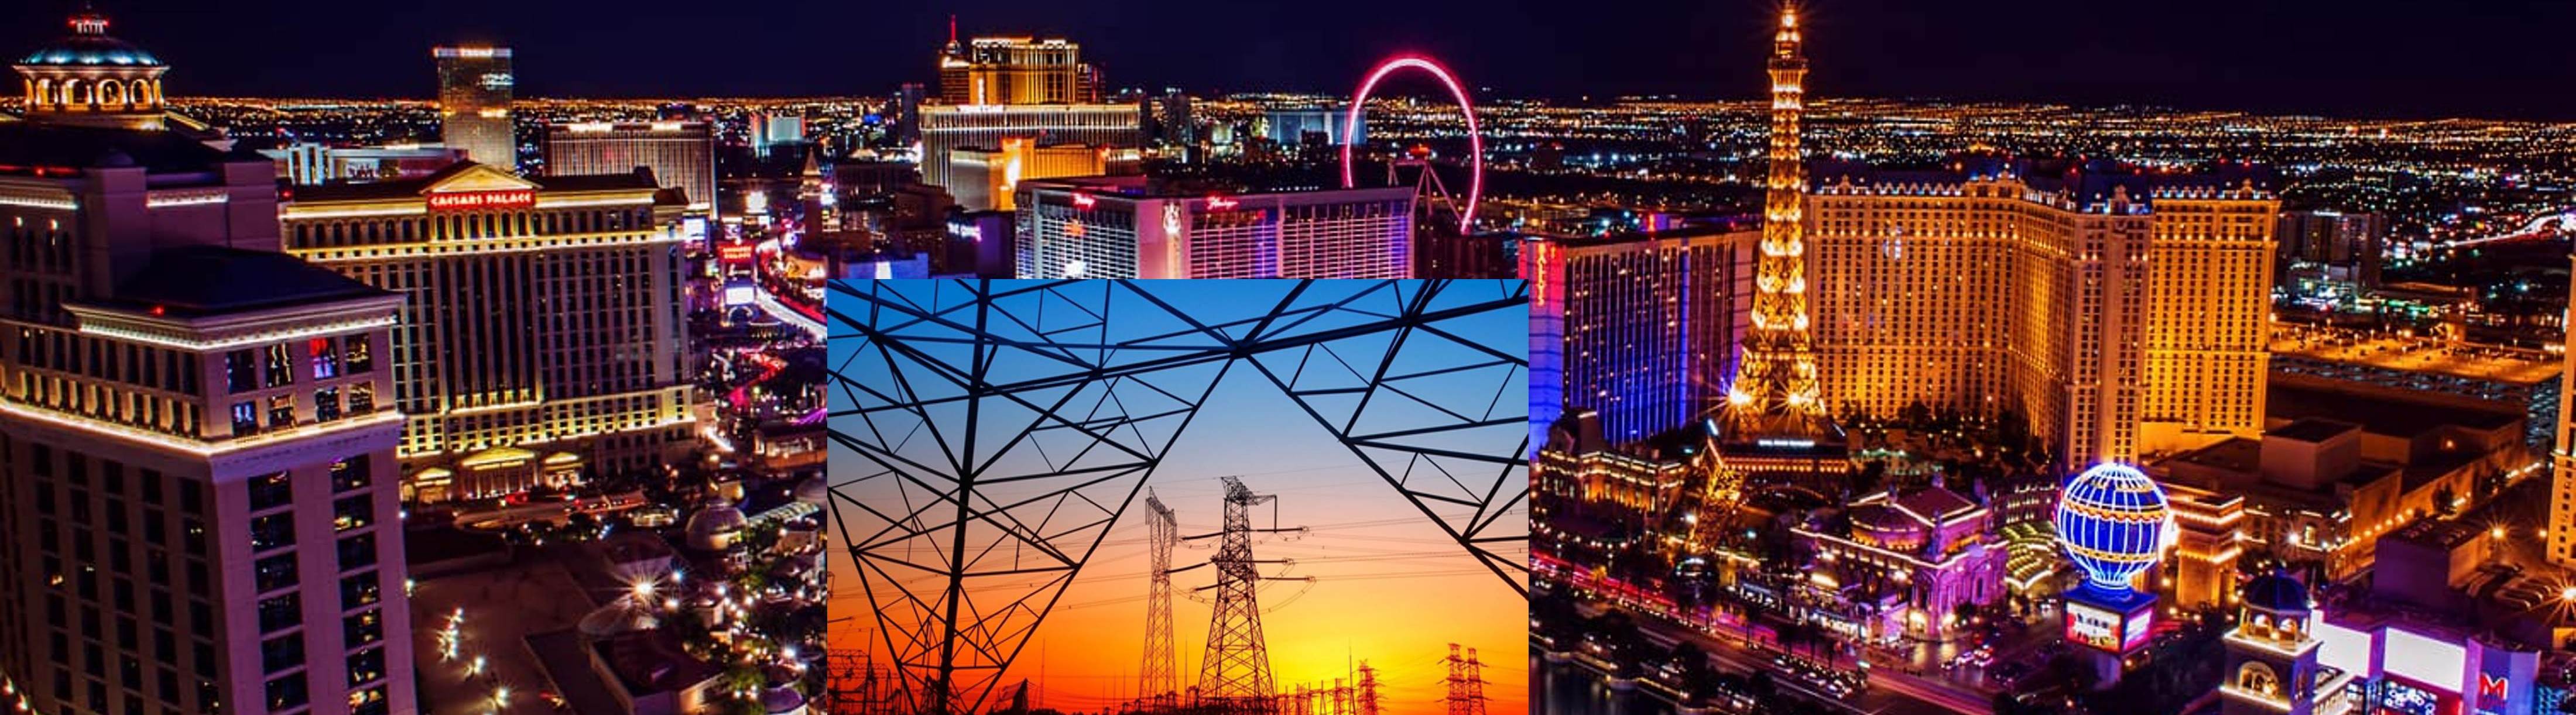 Electrical Engineering Principles & Practice for Non-EE's (8-PDH); Live, In-person, in Las Vegas